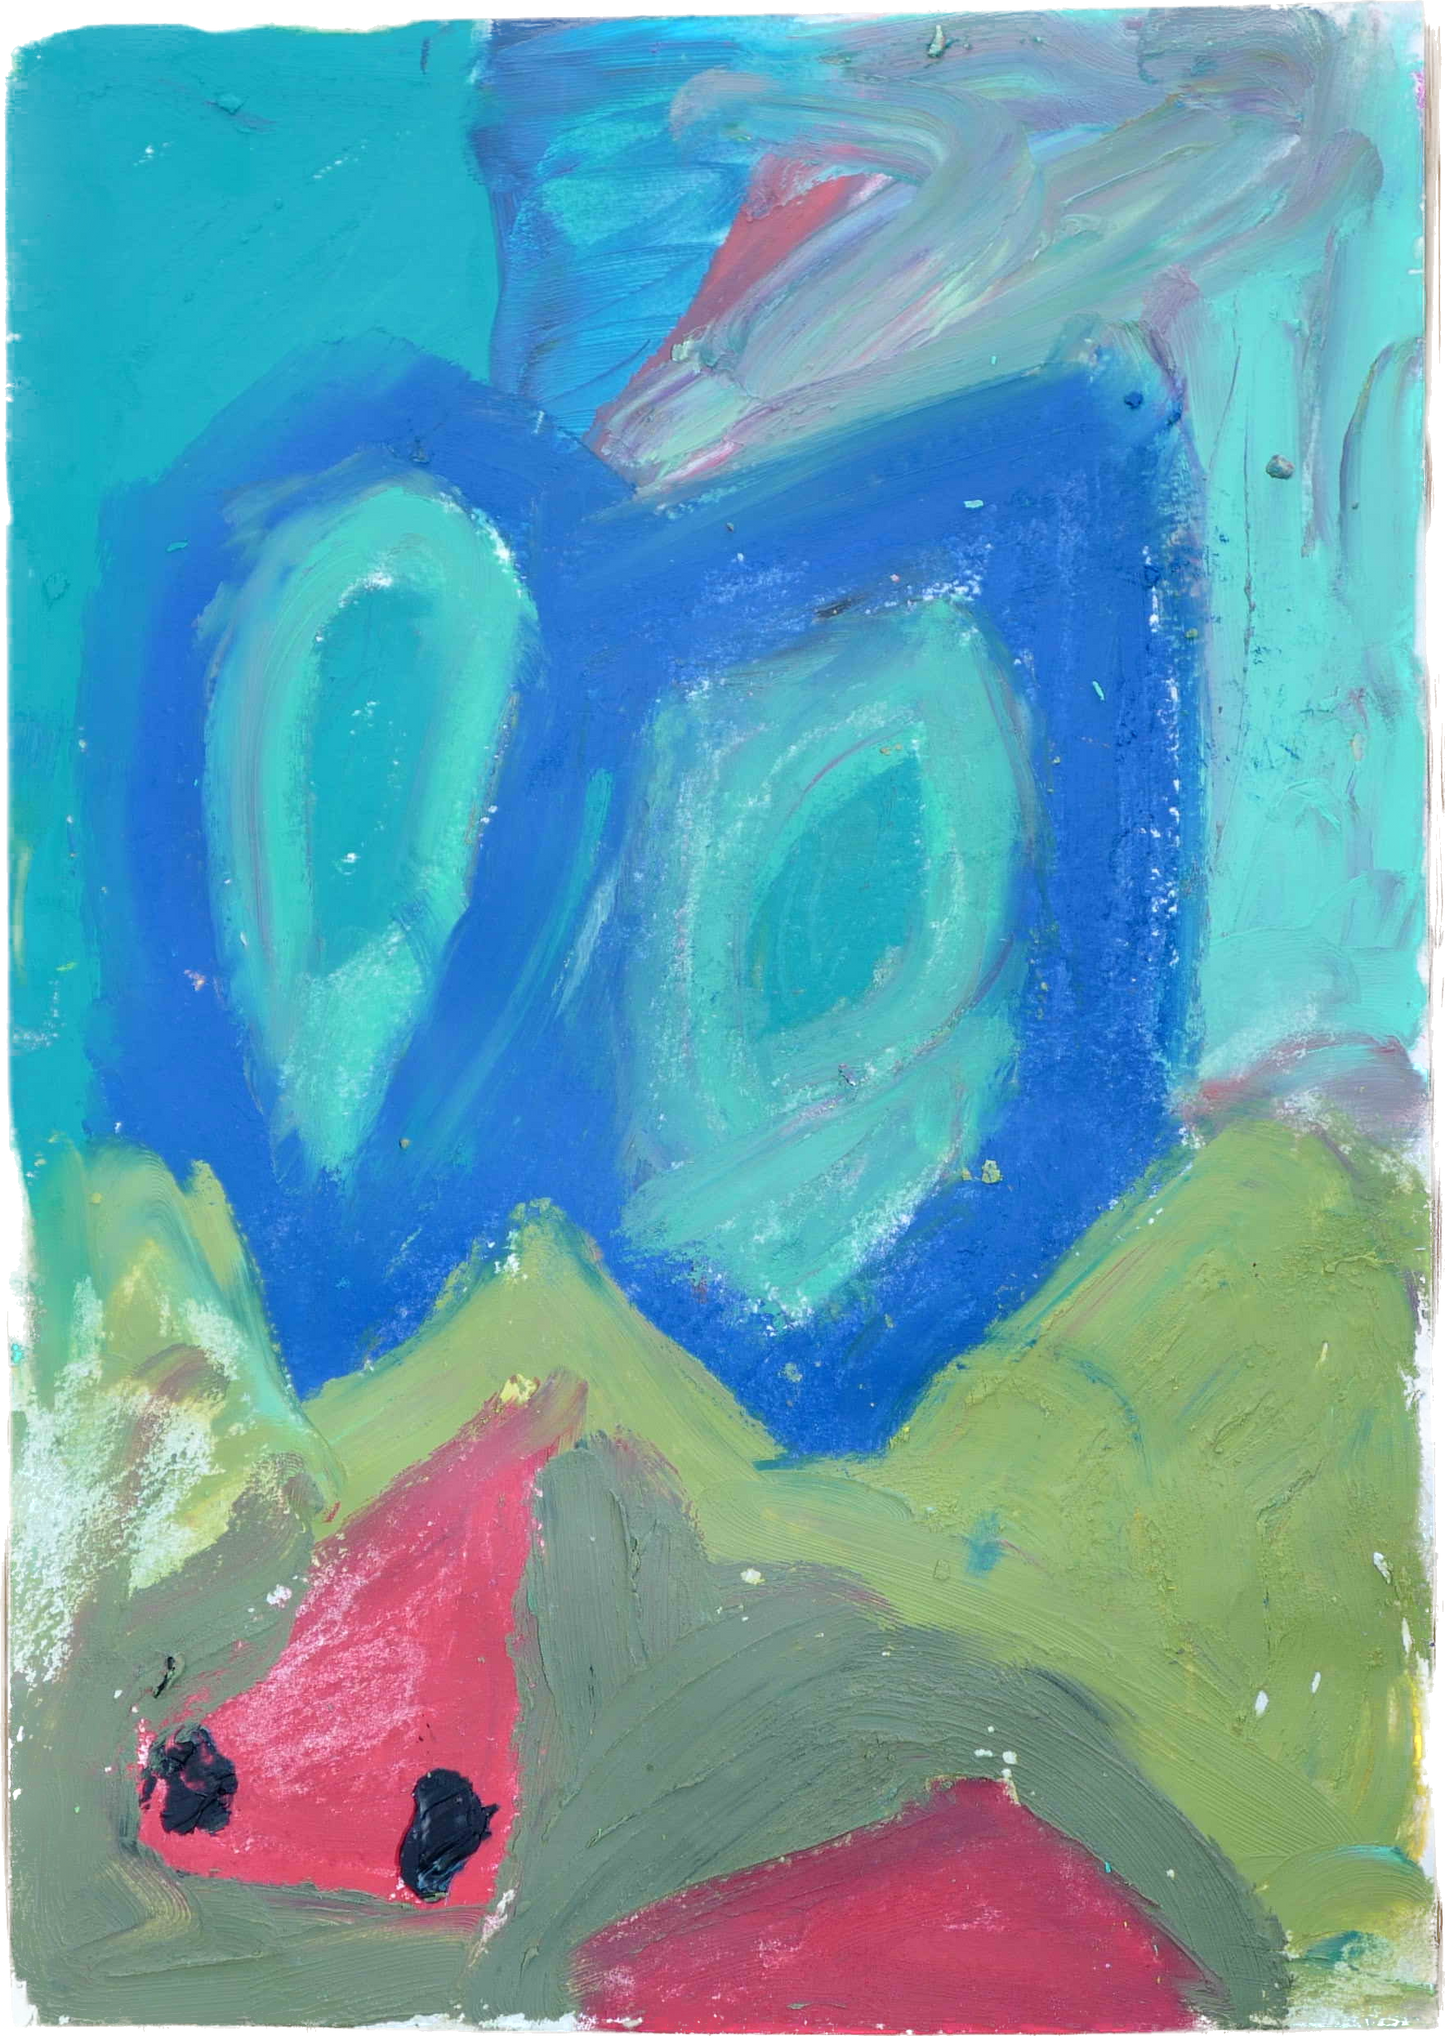 "Lenfantvivant spectral abstract artwork" "Dynamic blue and green oil pastel art" "Abstract art with red accents by Lenfantvivant" "Enigmatic Sauna Fusion Art piece" "Abstract composition resembling a mirage"